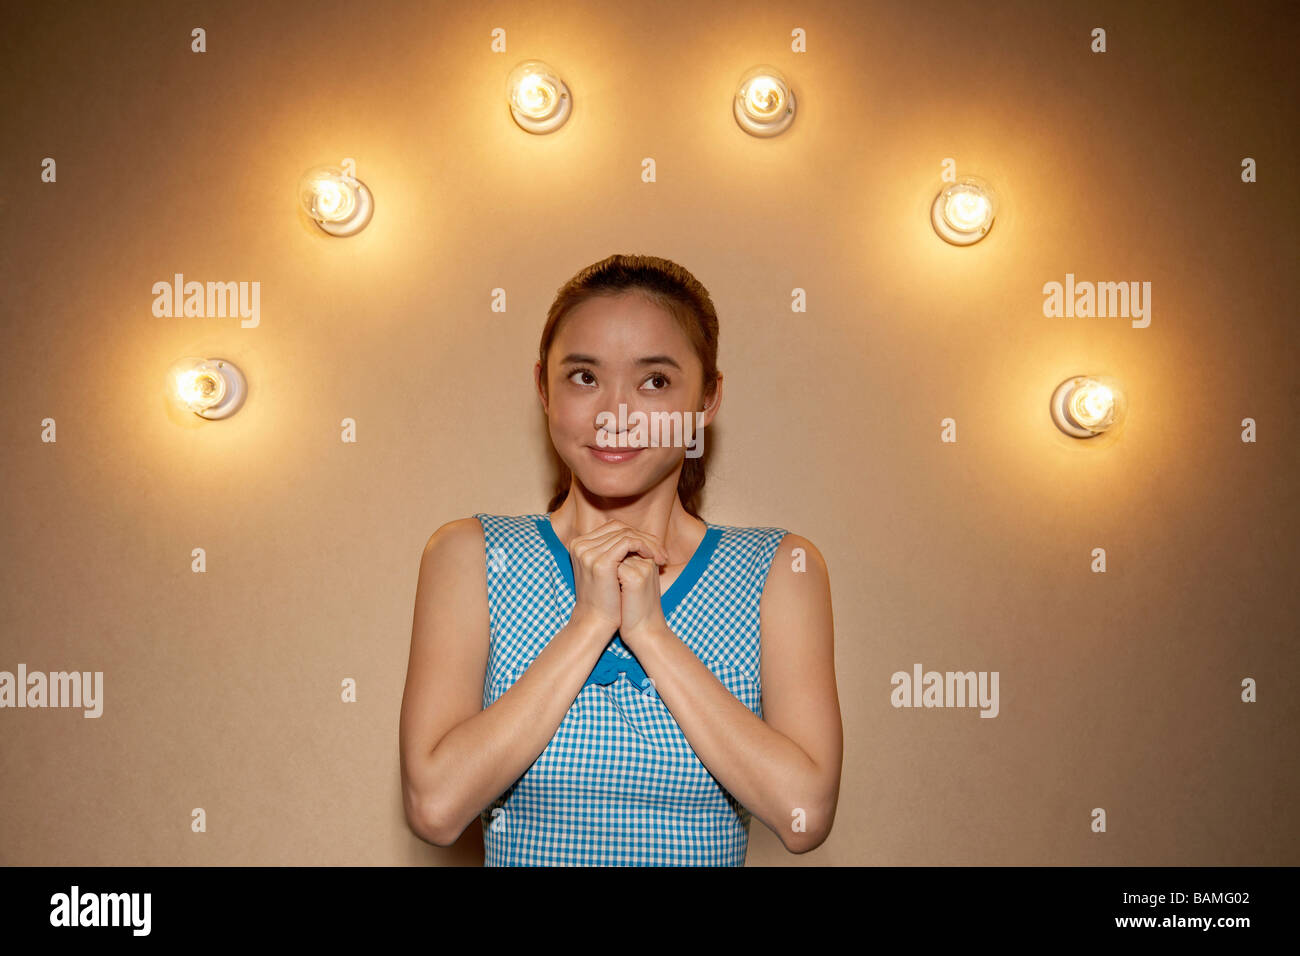 Young Woman With A Halo Of Lightbulbs Stock Photo